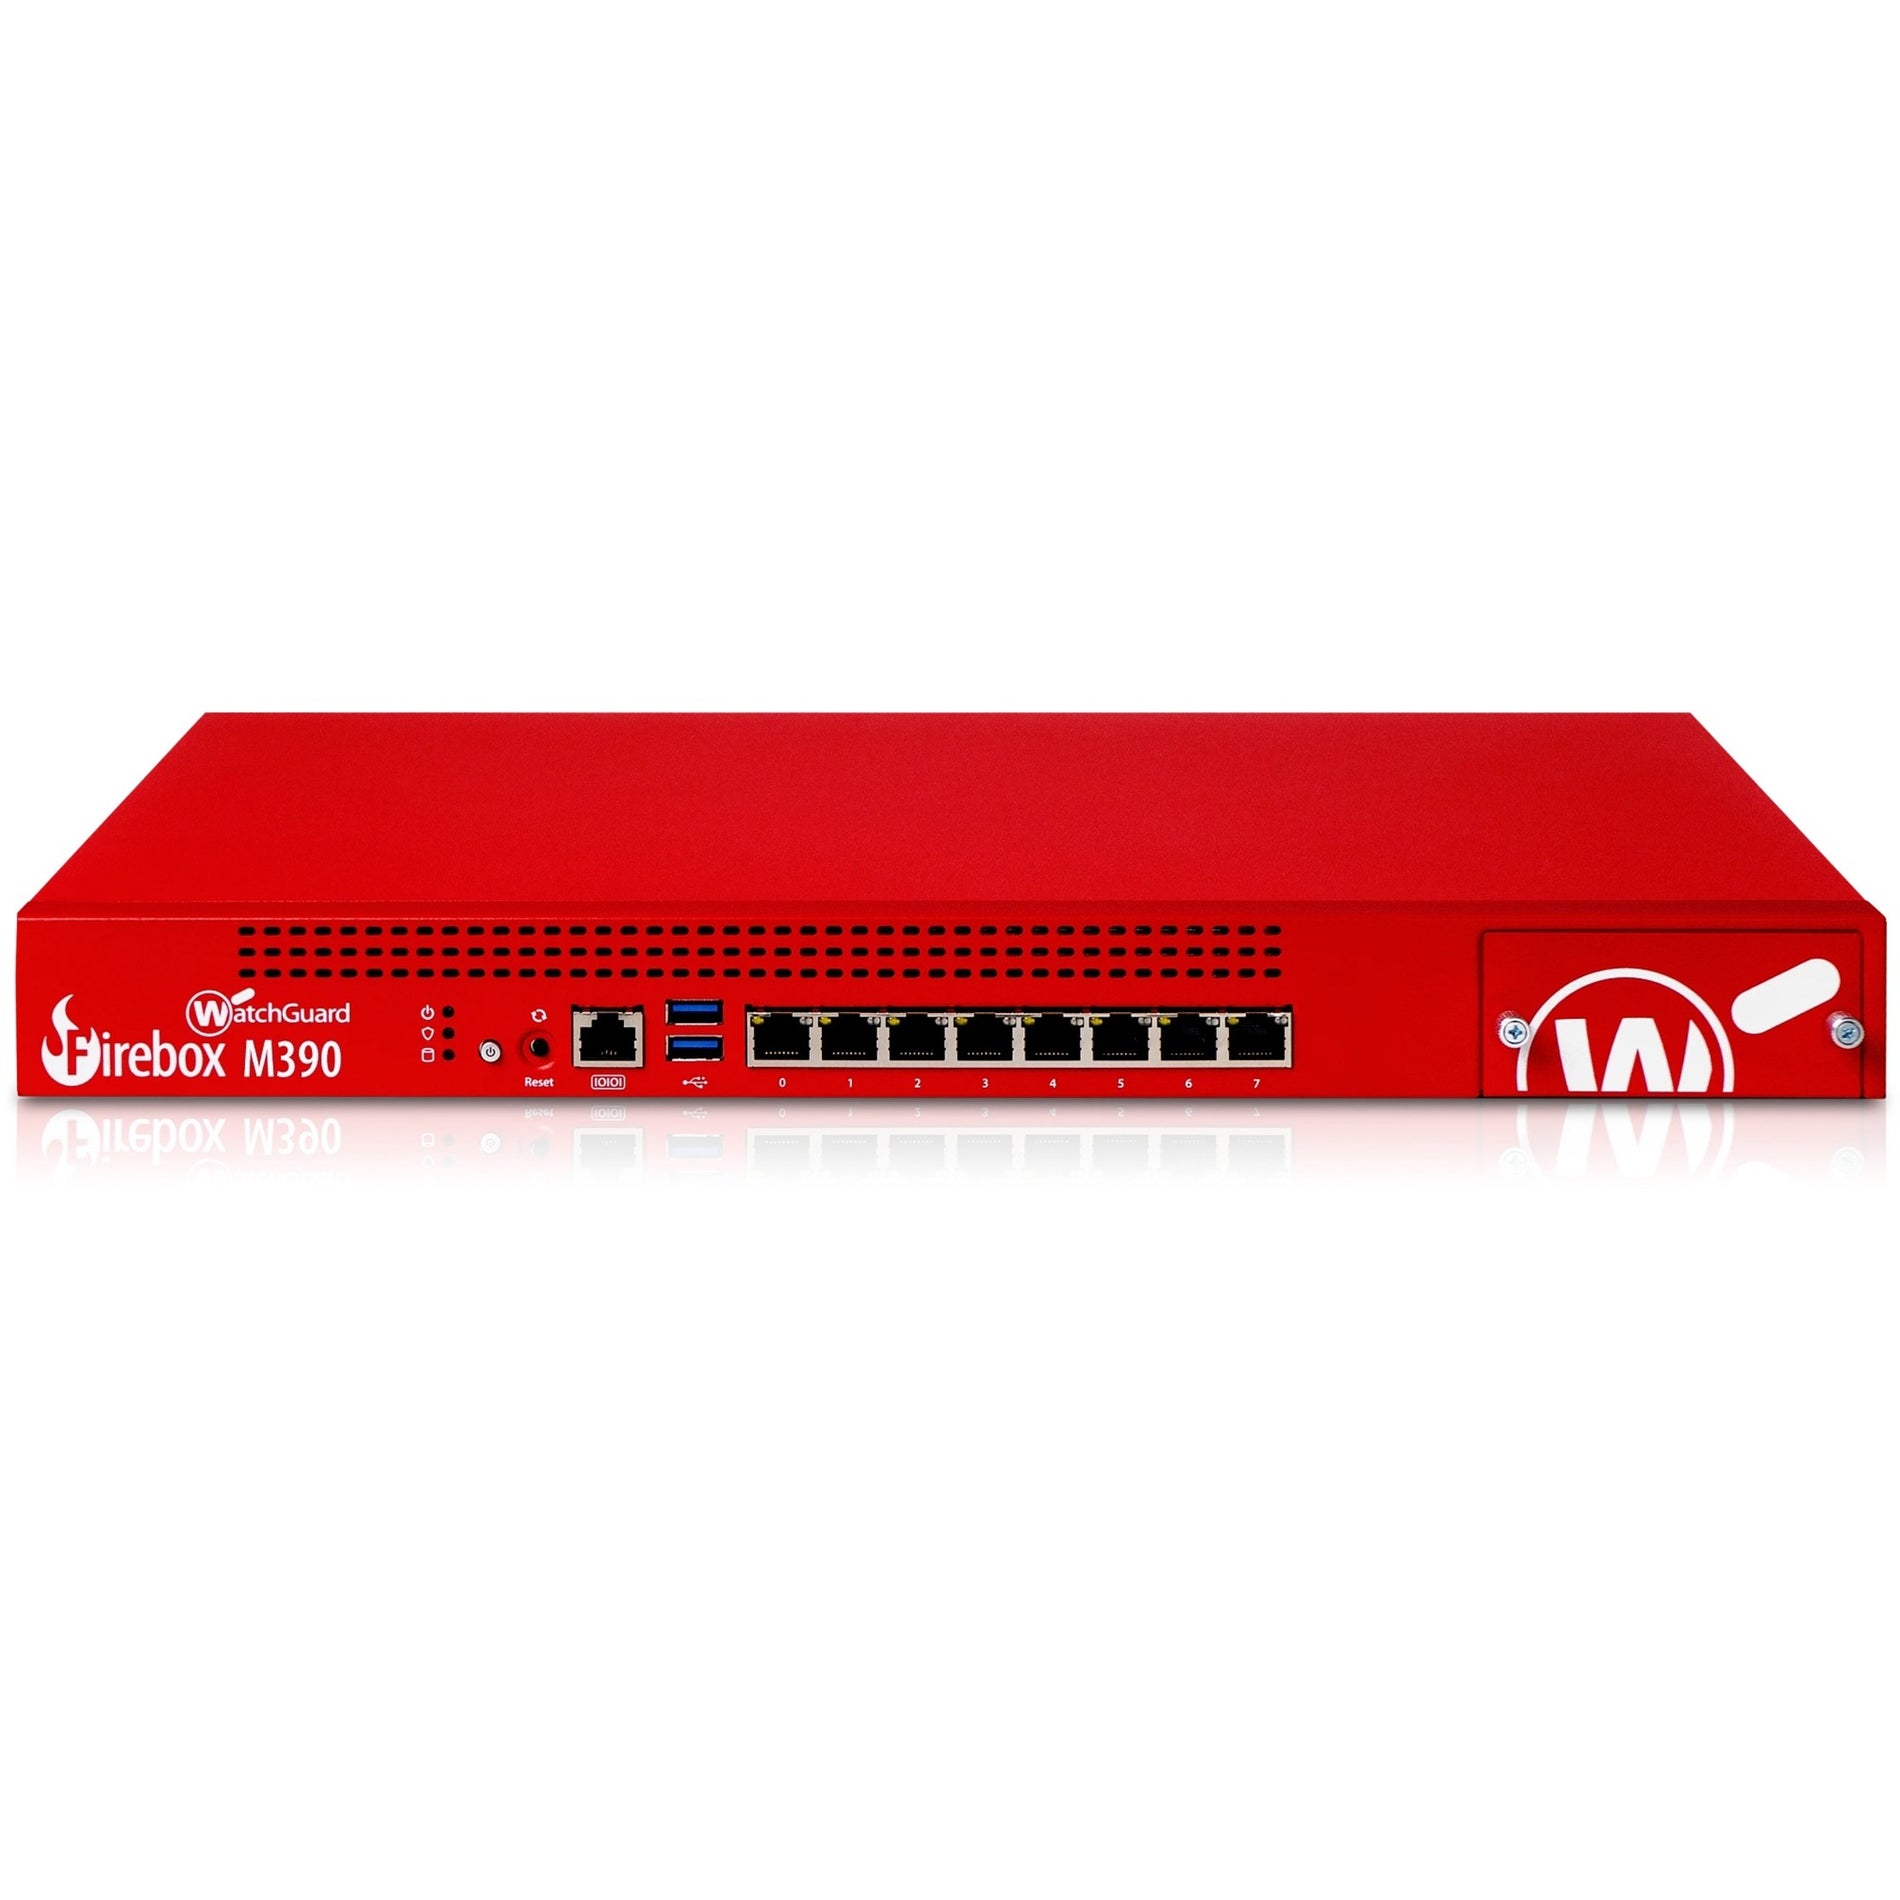 WatchGuard WGM39002003 Firebox M390 Network Security/Firewall Appliance, 8 Ports, 3-Year Basic Security Suite